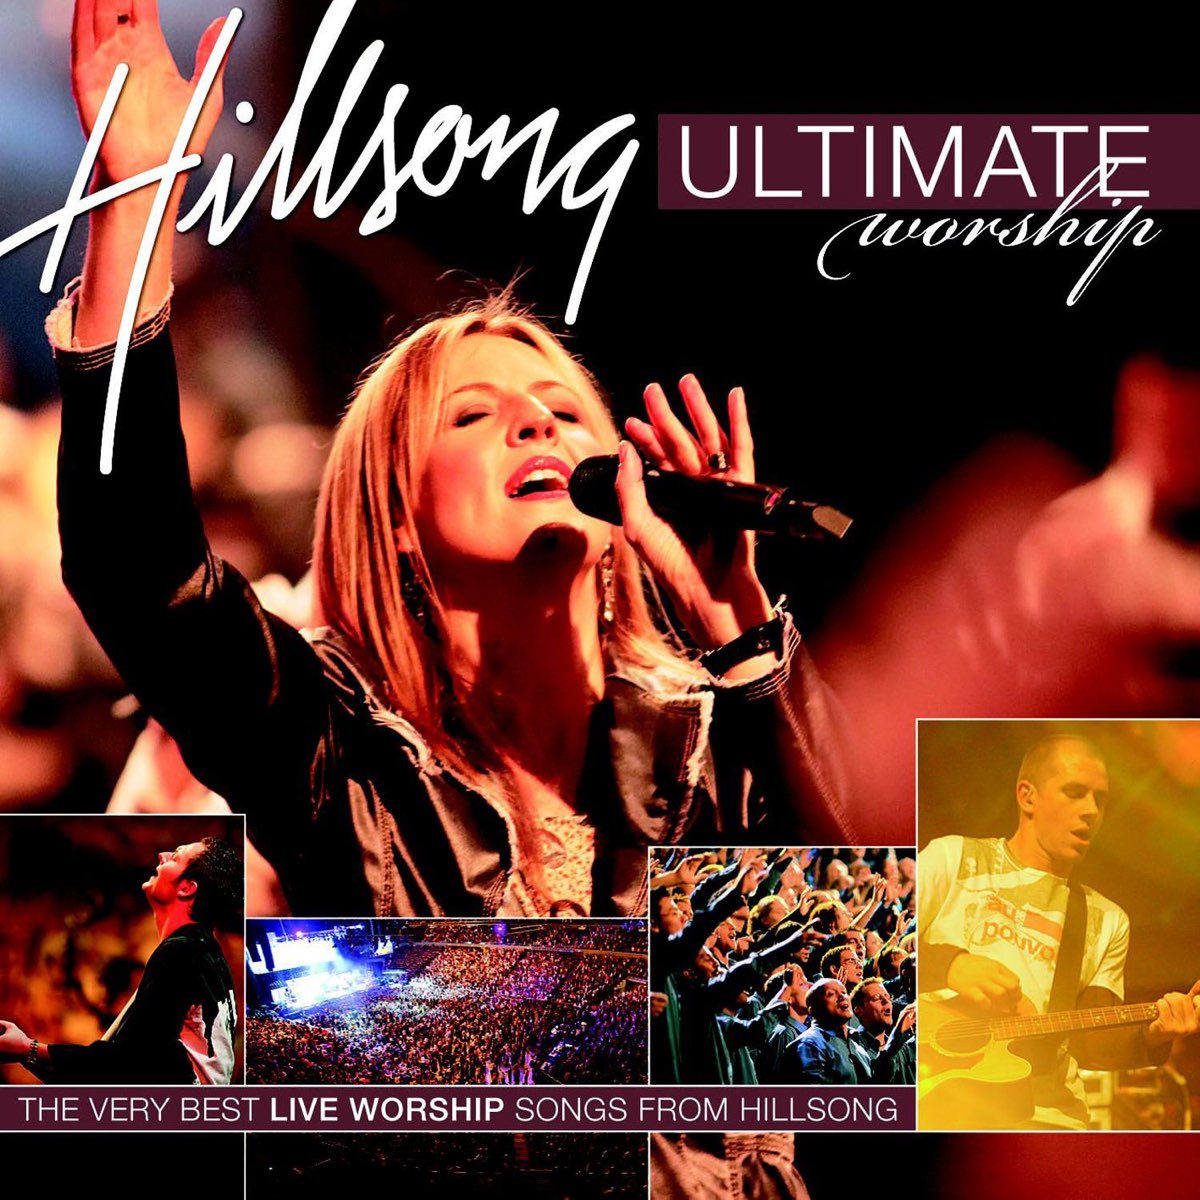 Ultimate Worship: Hillsong (Live) by Hillsong Worship on Apple Music